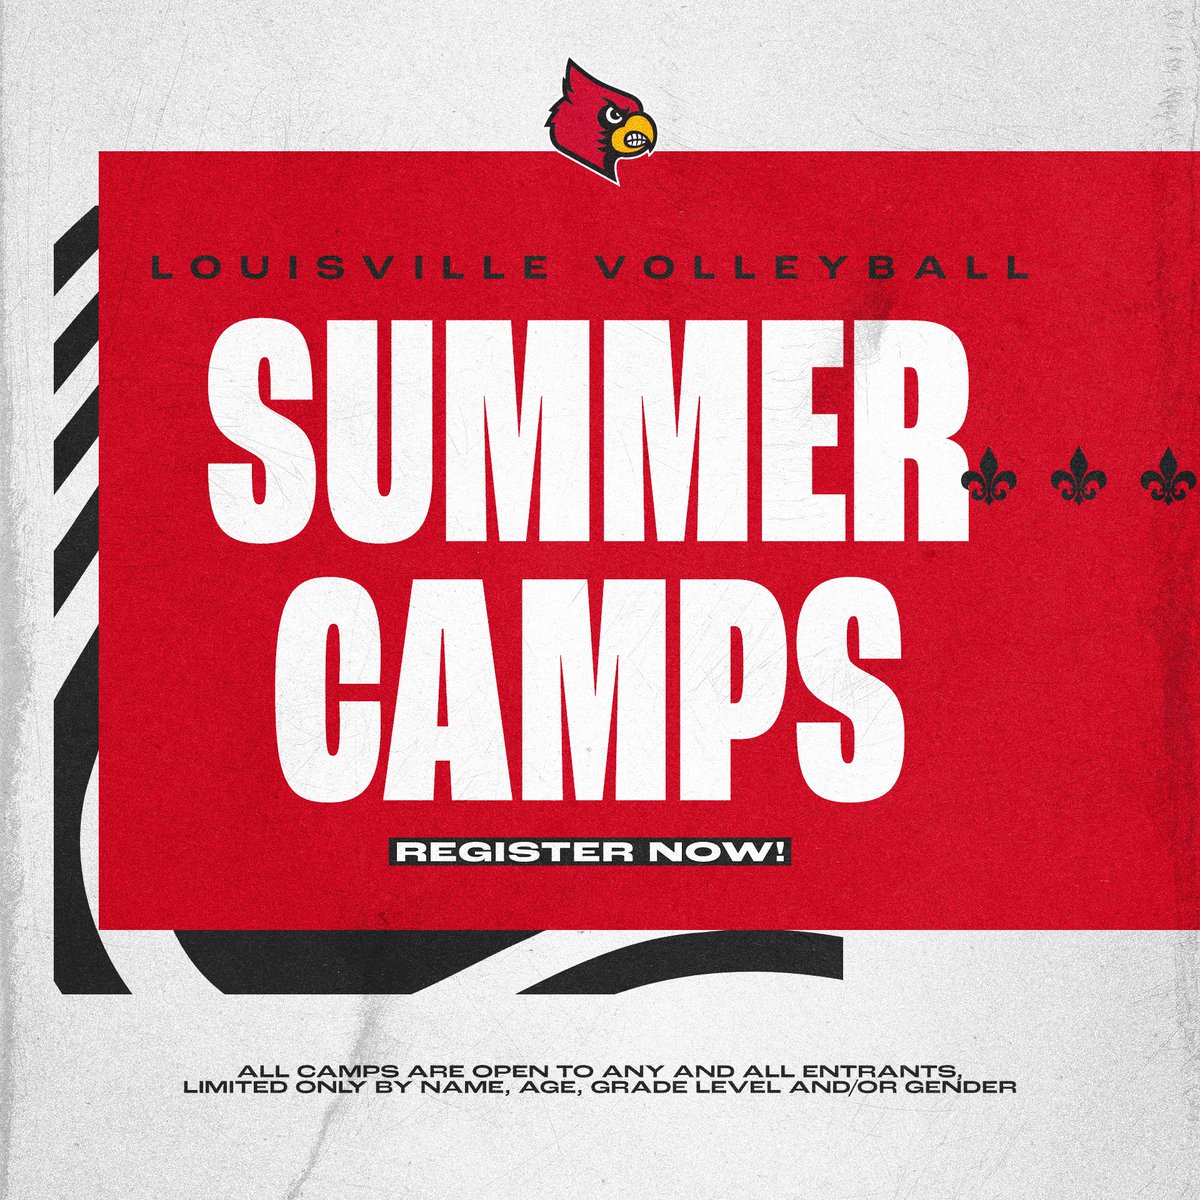 Spend your summer break with the Cards at our camps!☀️ Register: louisvillevolleyballcamps.com #GoCards